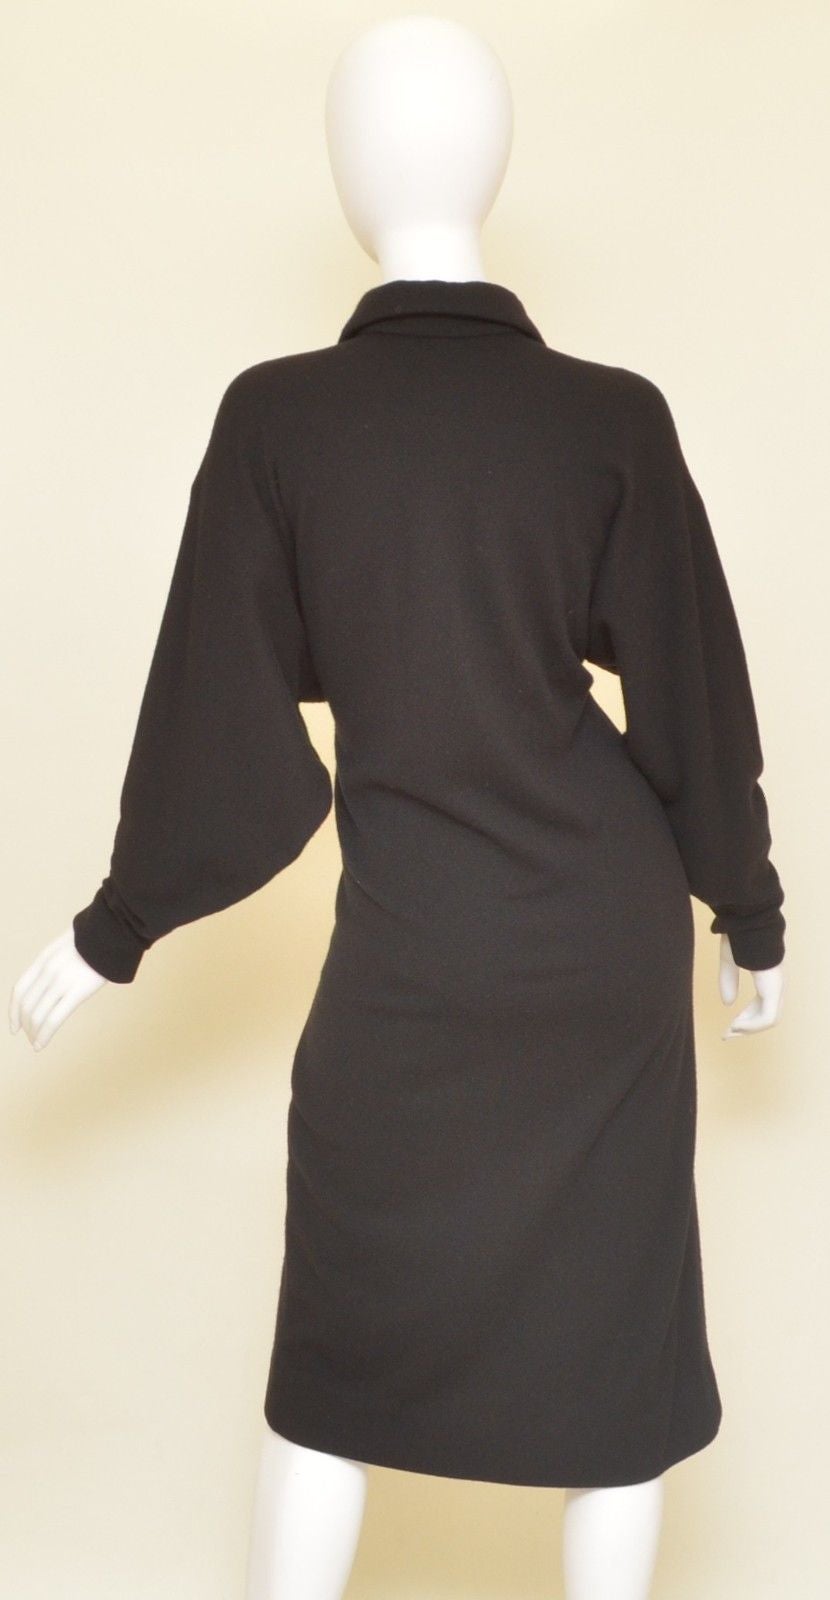 Halston cashmere dress has three button closures along the front and slits at the cuffs. 

Measurements:
Bust - 40''
Waist - 37.5''
Hips - 37.5''
Sleeve Length - 22''
Length - 44.5''